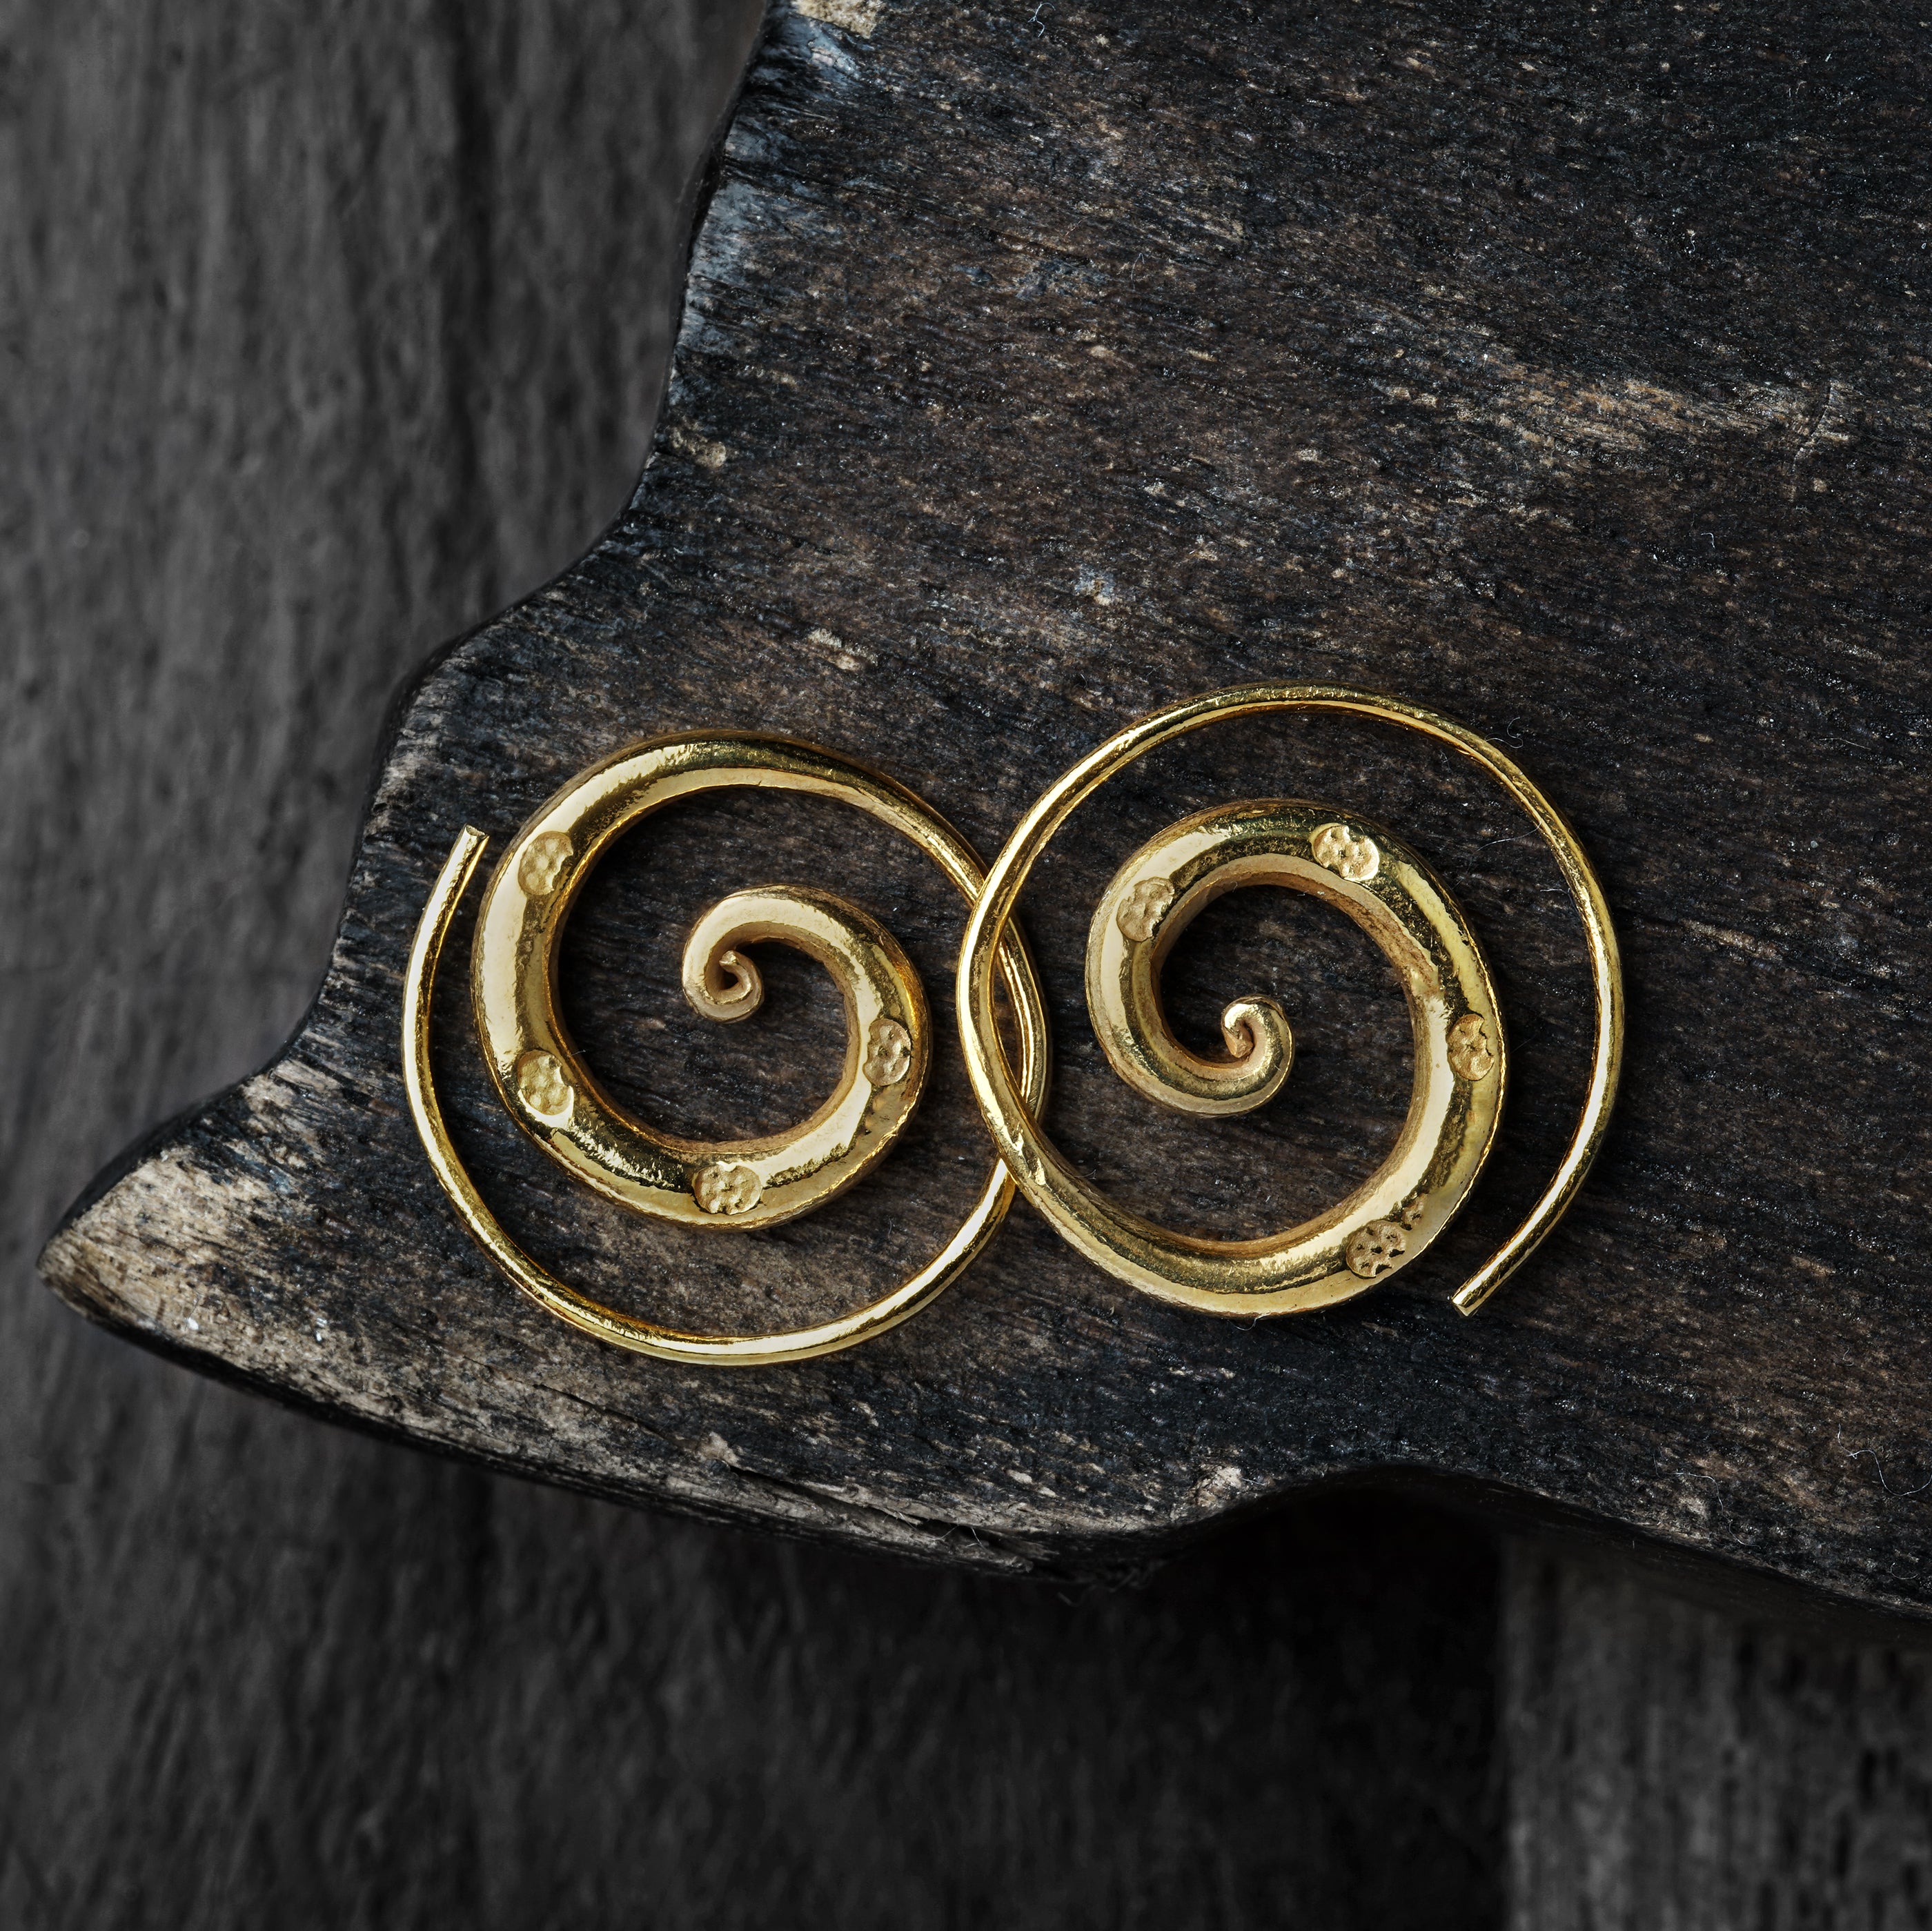 Stamped Gold Spiral Earrings